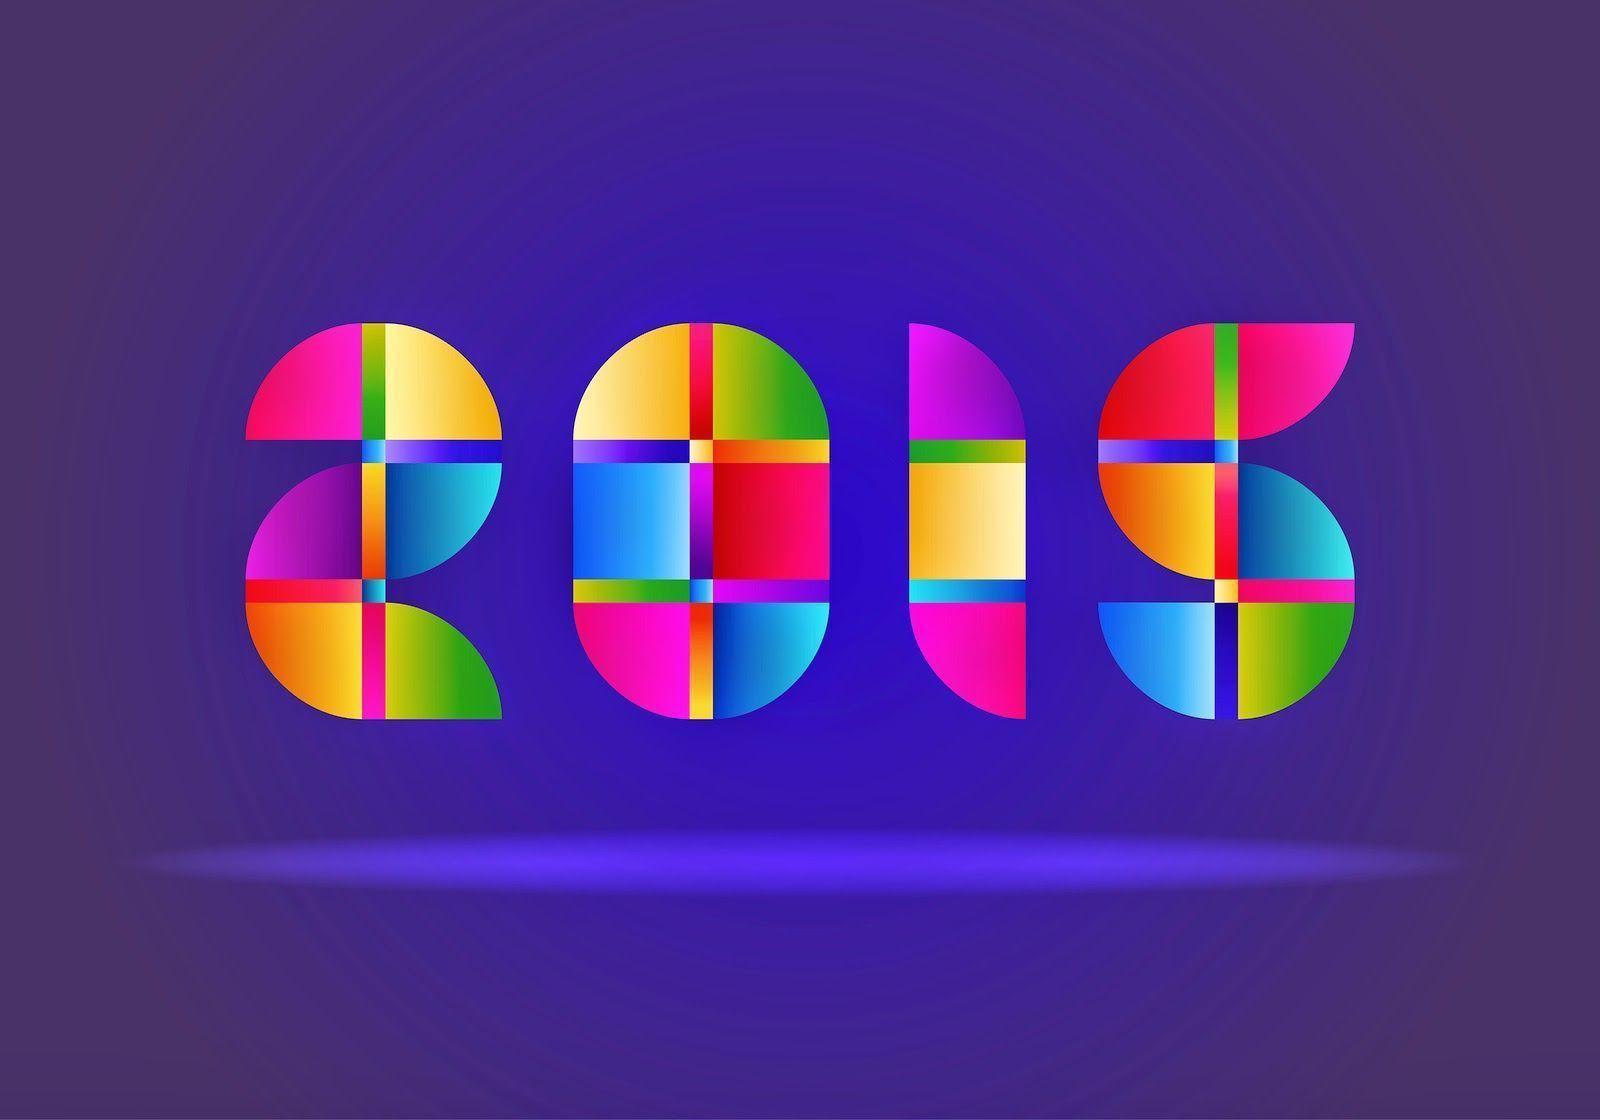 New Year 2015 HD Wallpaper and Image